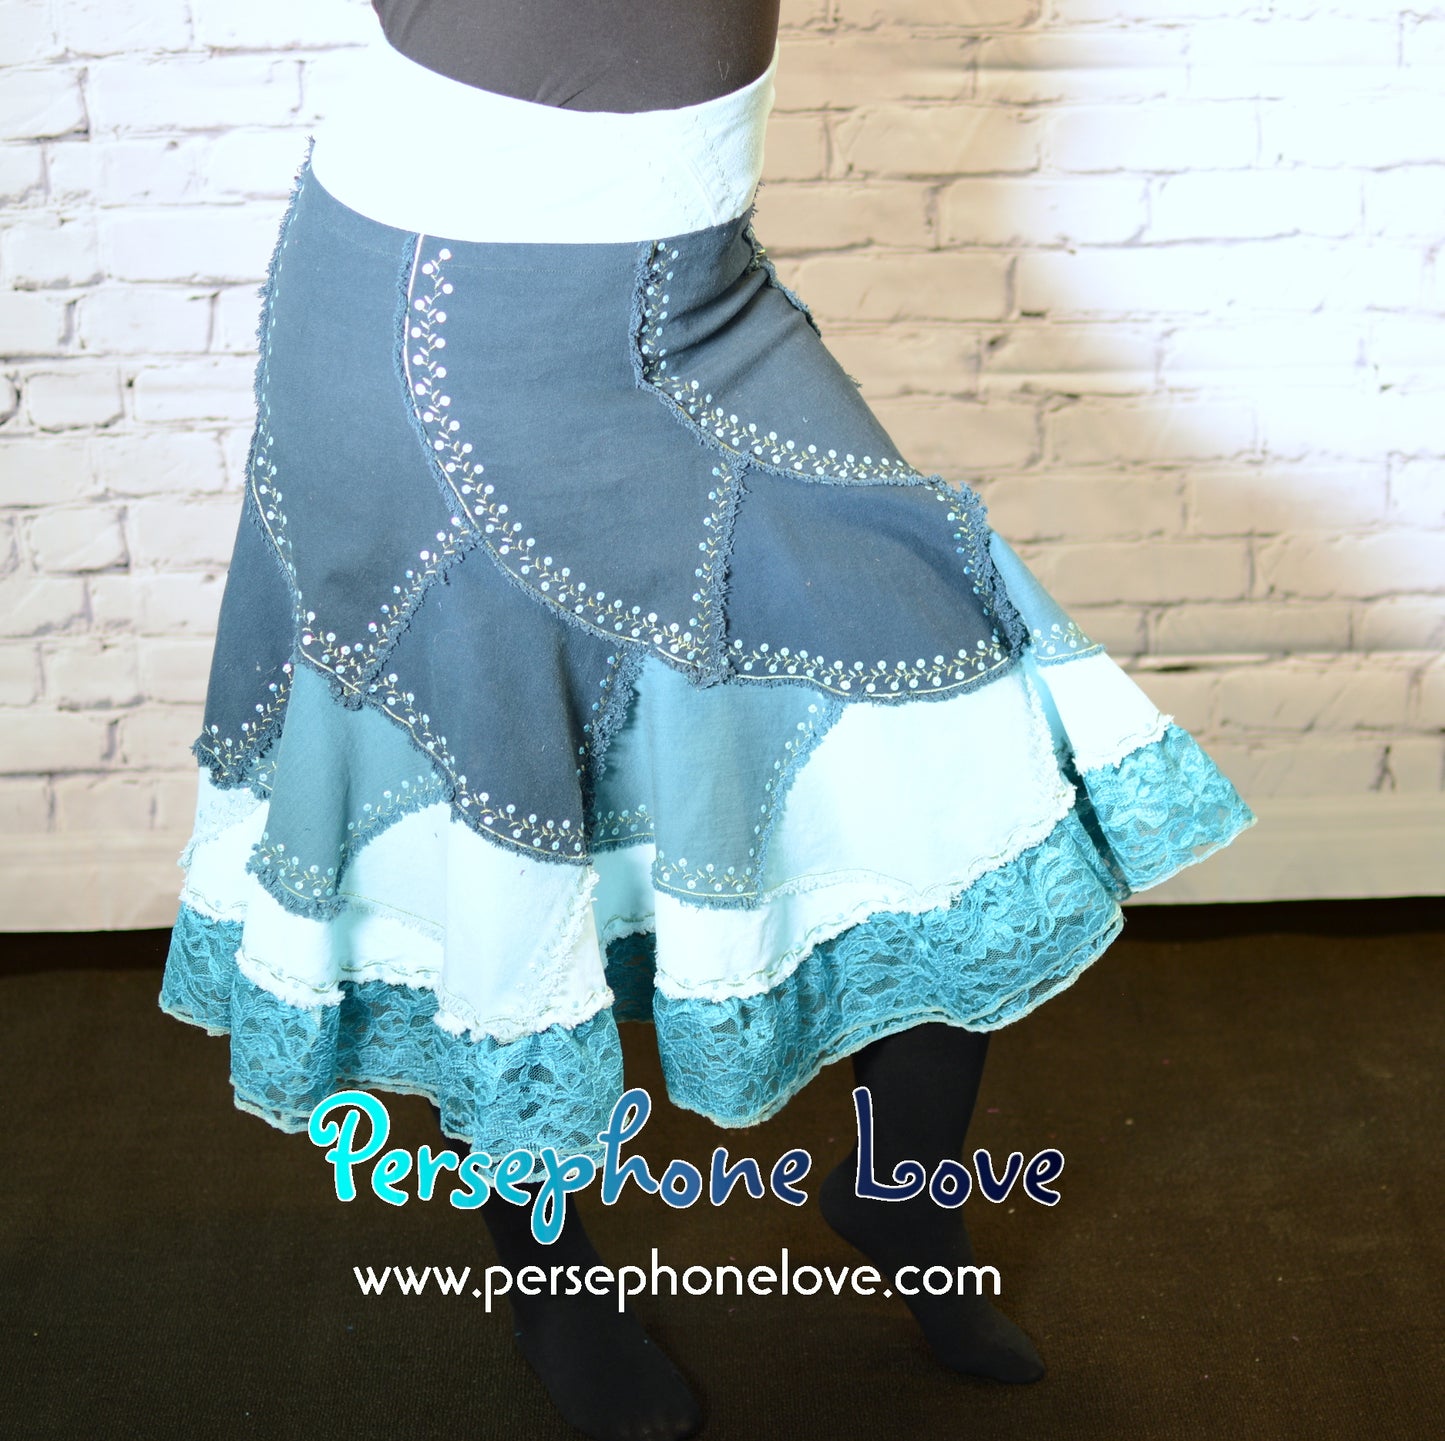 Turquoise ombre patchwork denim upcycled twirly spiral festival skirt embroidery sequins-2004